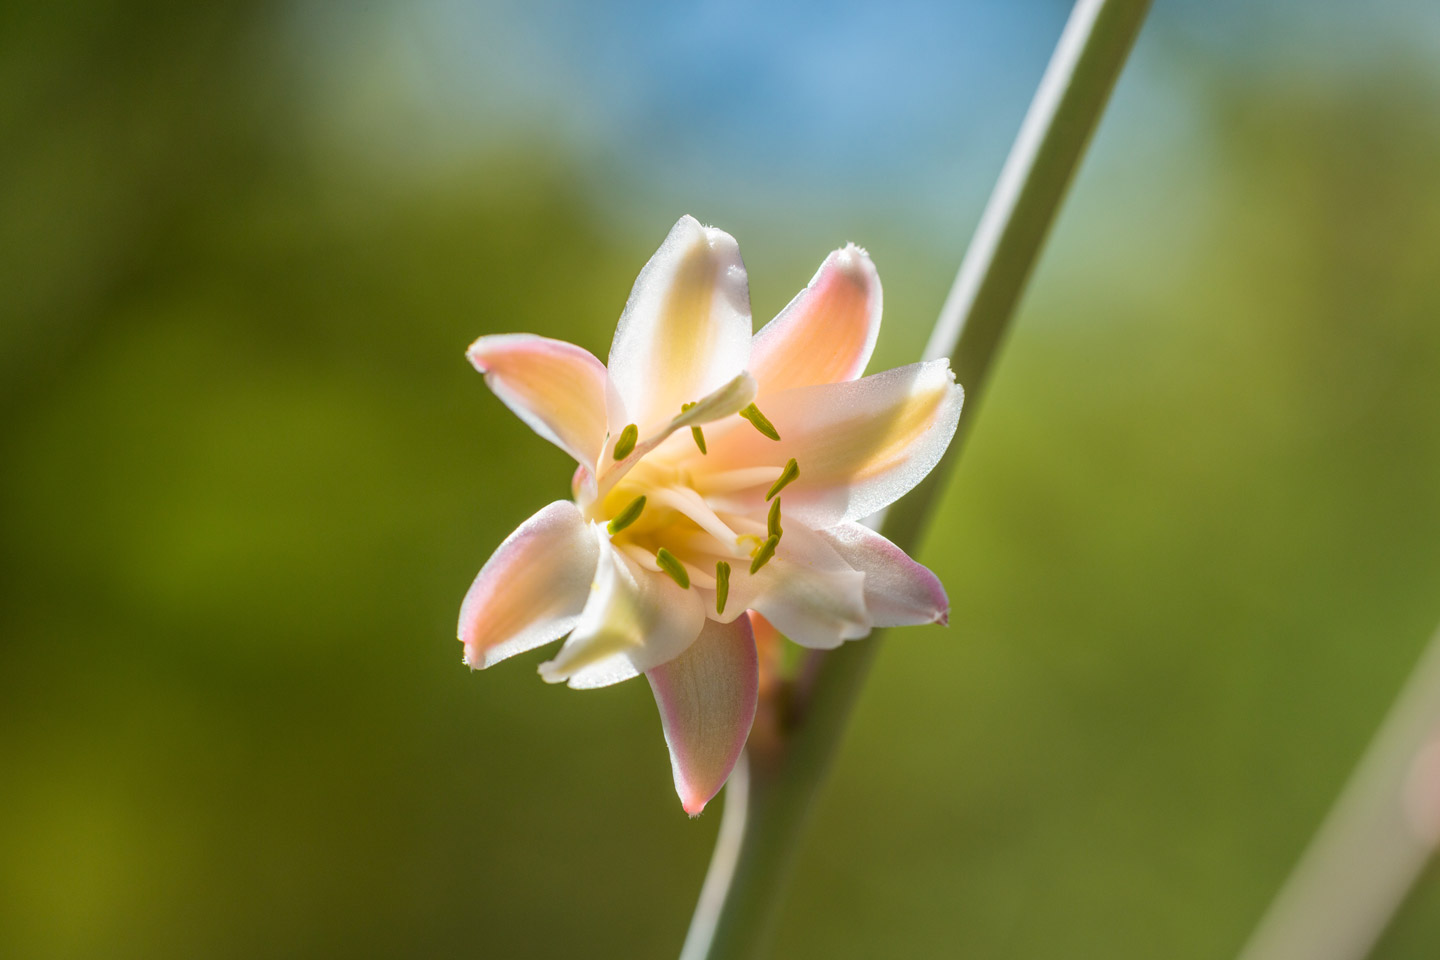 A close-up of a single pinkish-white Giant Hesperaloe flower.